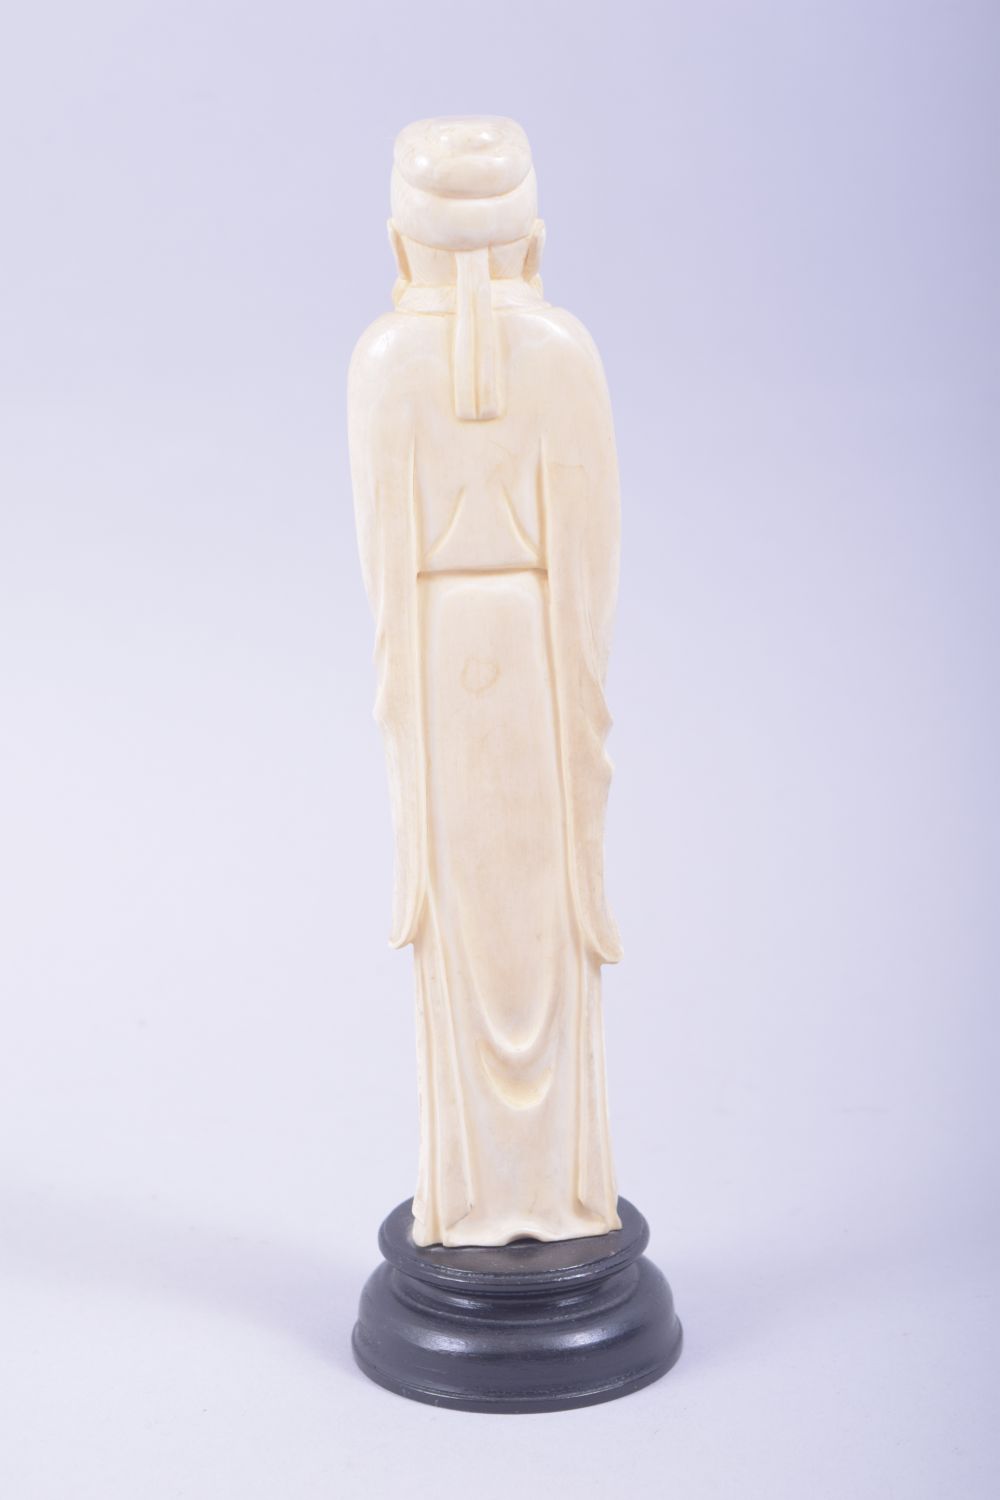 A CHINESE CARVED IVORY FIGURE OF A SAGE holding a flower, mounted to a hardwood base, 23cm high. - Image 3 of 7